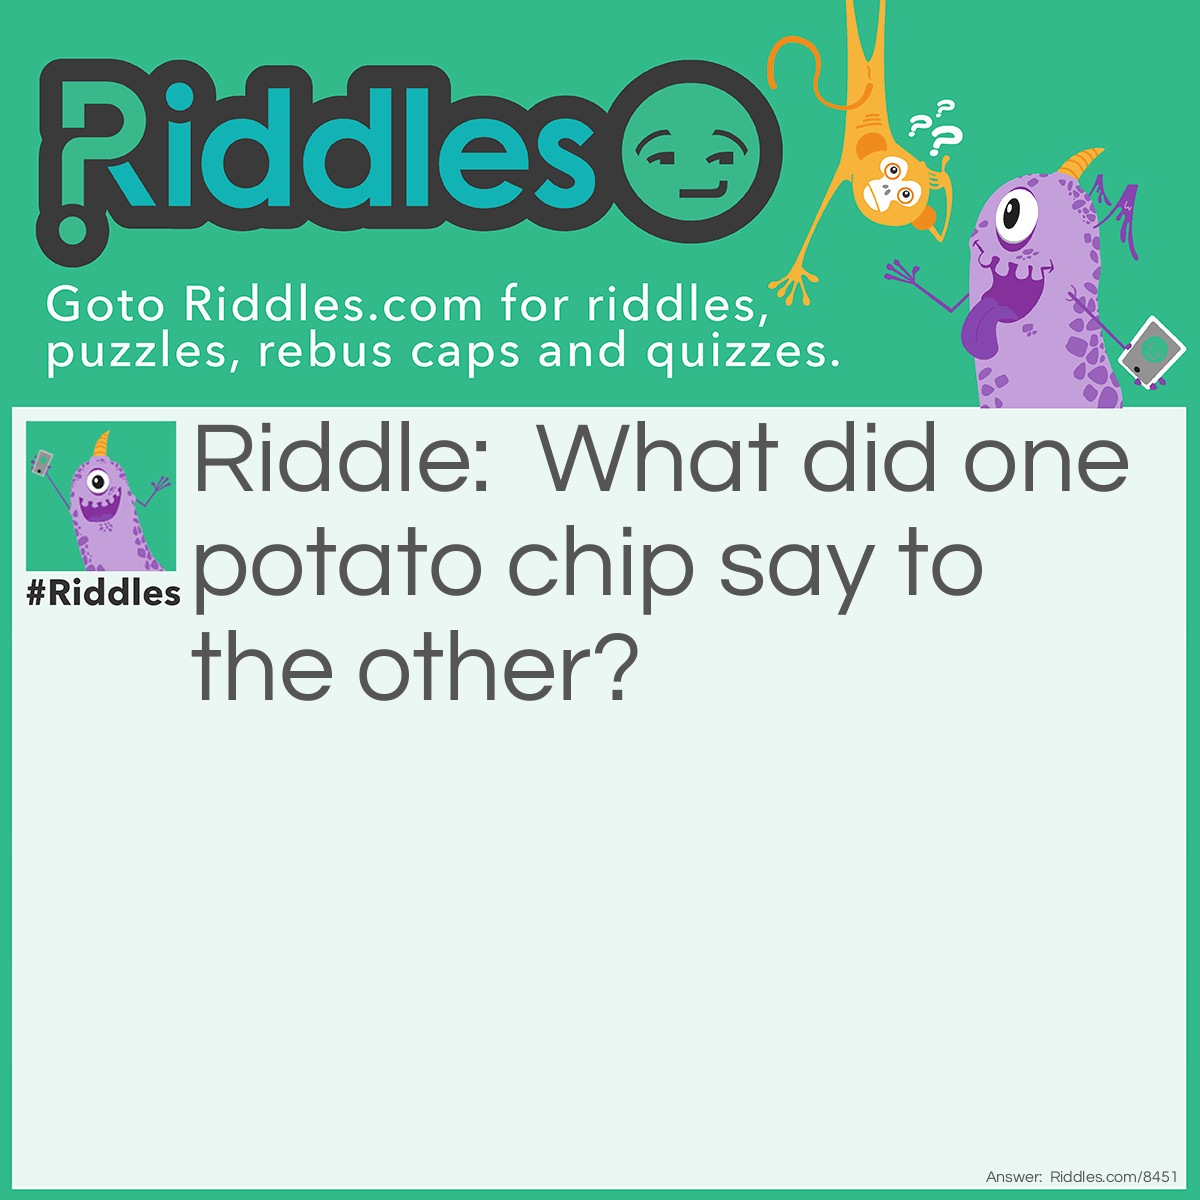 Riddle: What did one potato chip say to the other? Answer: "Shall we go on a dip?"